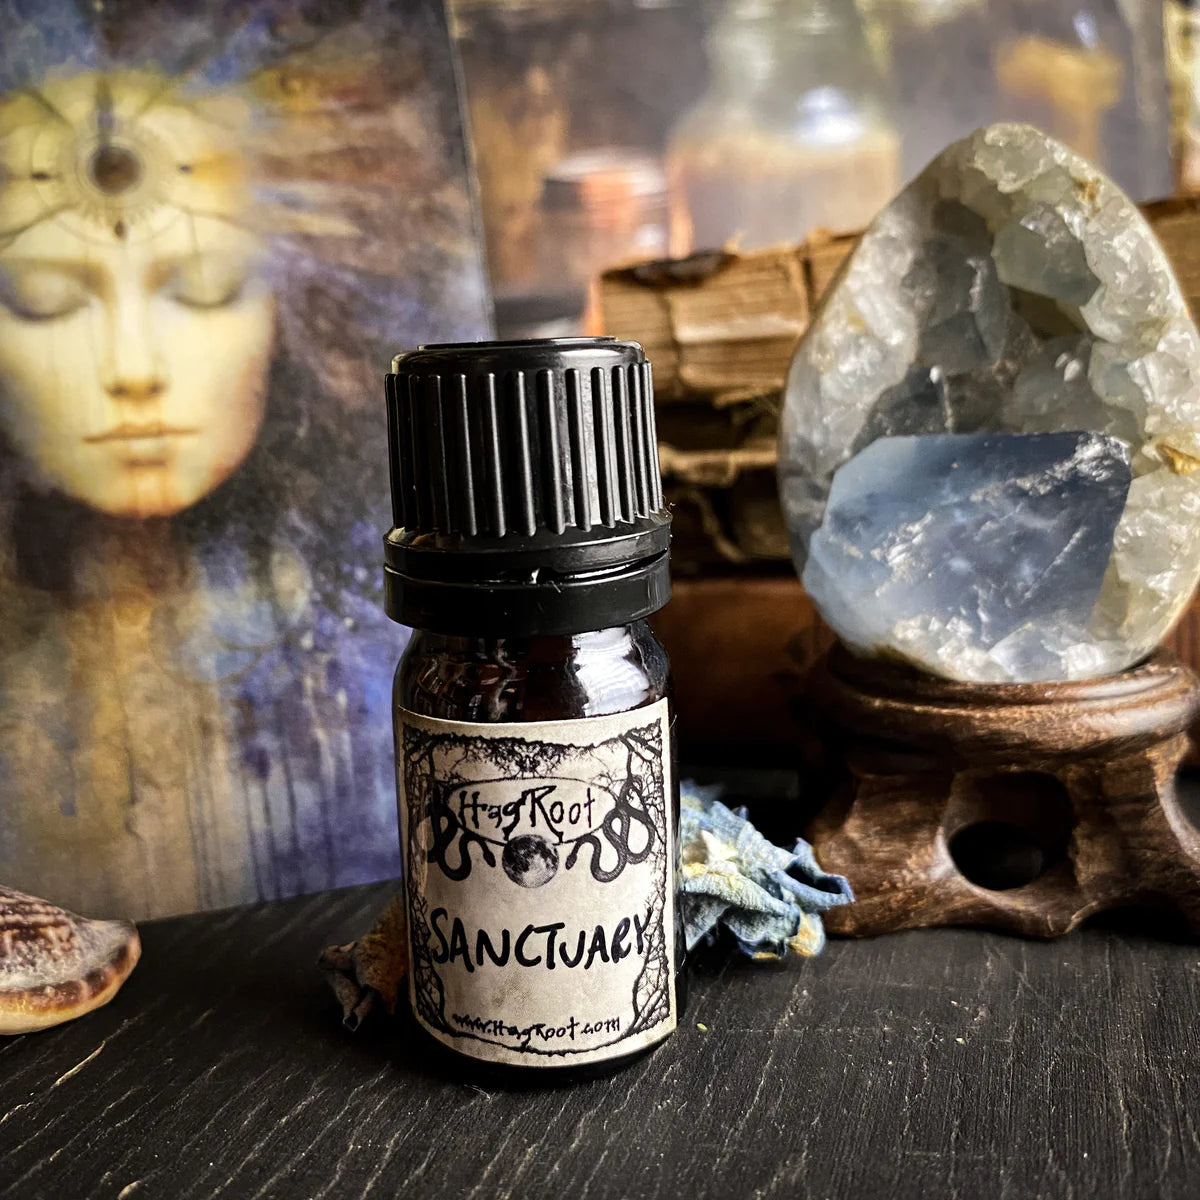 SANCTUARY-(Oud Wood, Moss, Cedar, Brown Sugar, Magnolia Blossoms, Vanilla, Vetiver, Leather, Amber, Oat, Patchouli)-Perfume, Cologne, Anointing, Ritual Oil